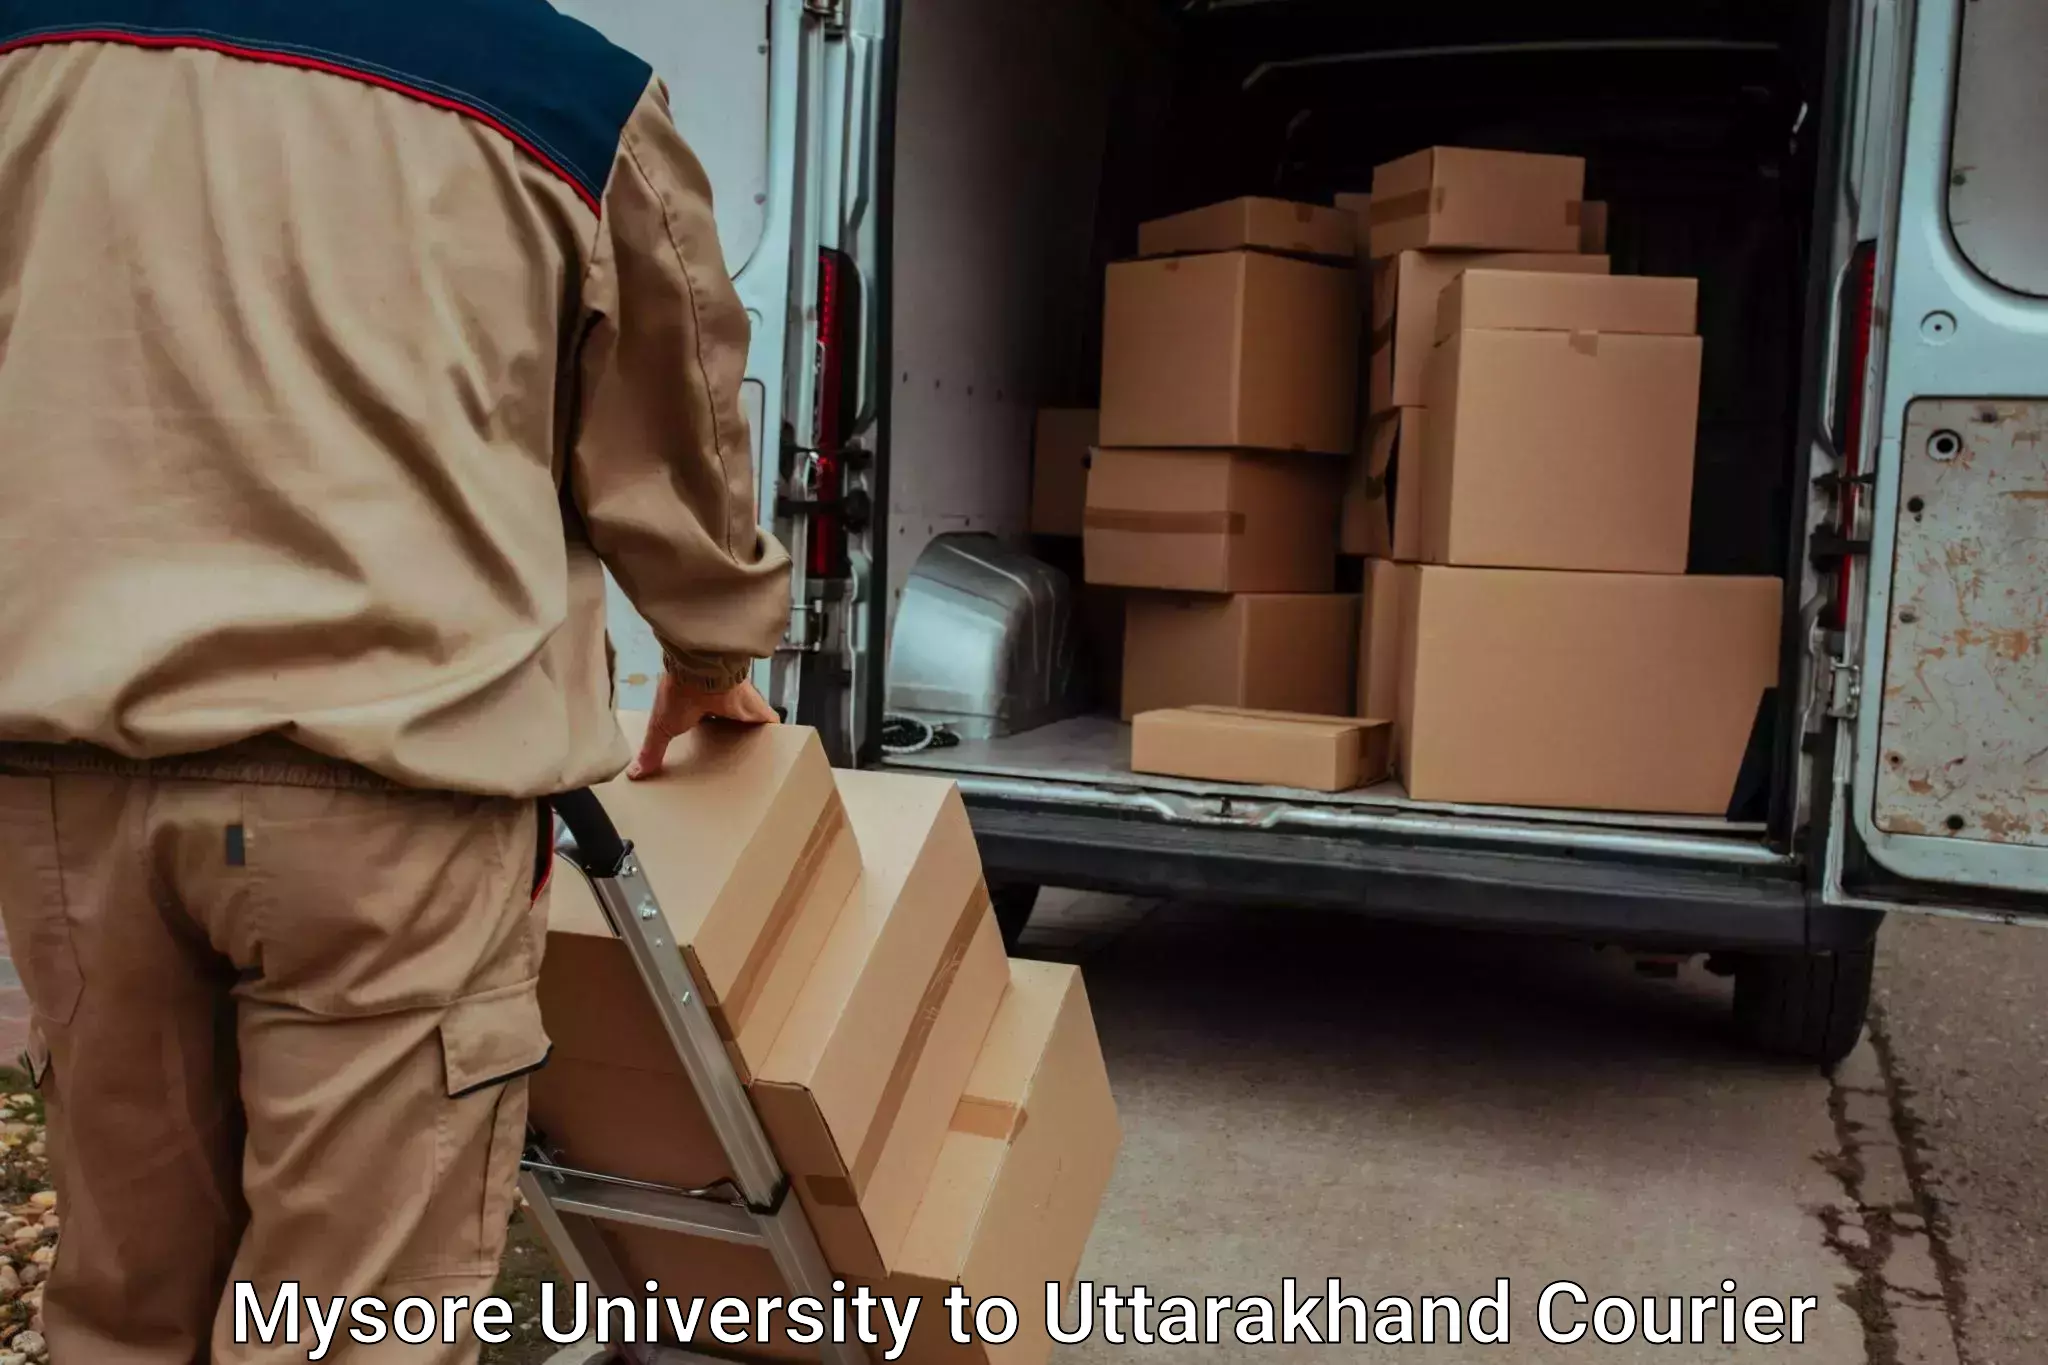 Nationwide furniture movers Mysore University to Rudrapur